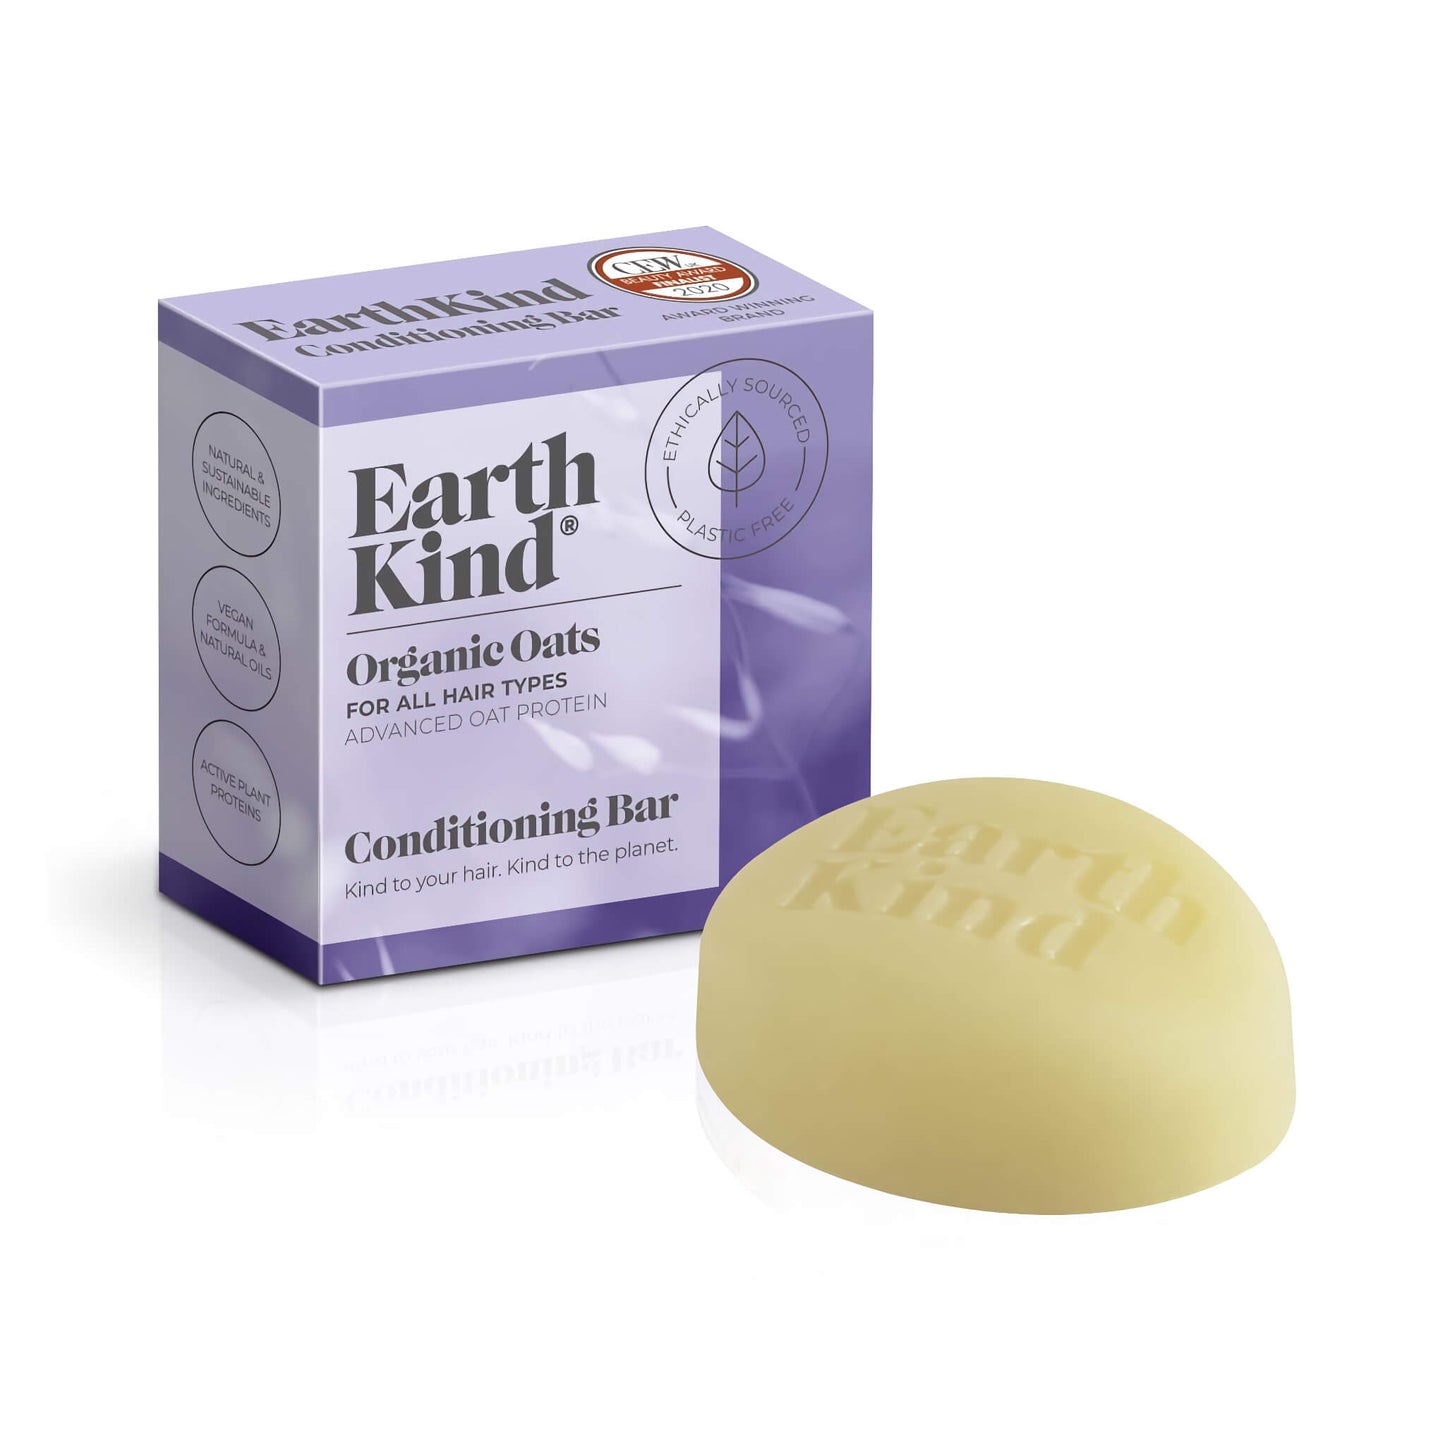 Earth Kind Organic Oats Conditioning Bar for ALL Hair Types